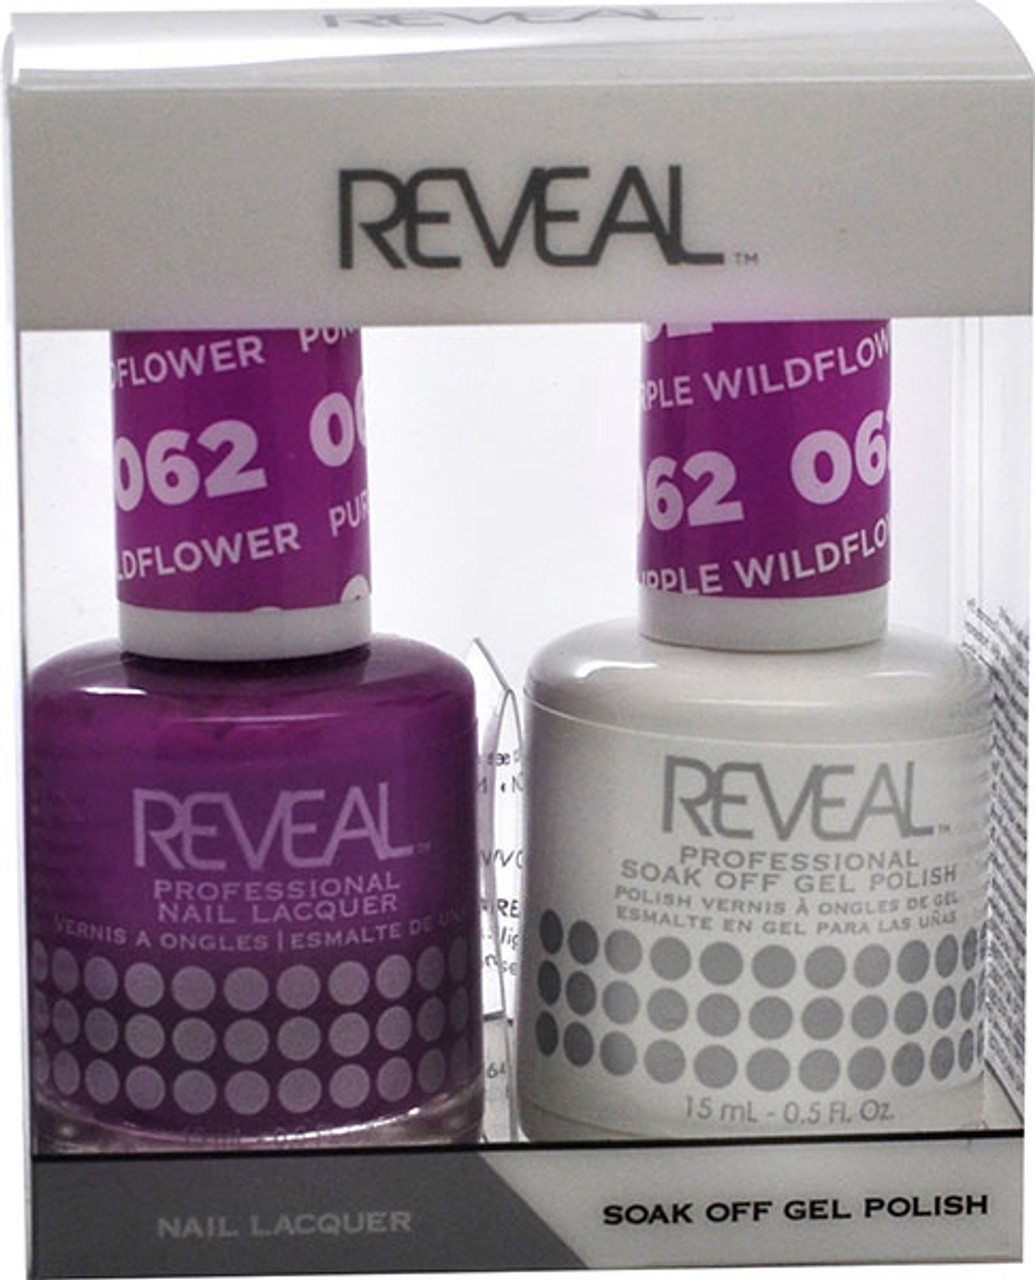 Reveal Gel Polish & Nail Lacquer Matching Duo - PURPLE WILDFLOWER - .5 oz